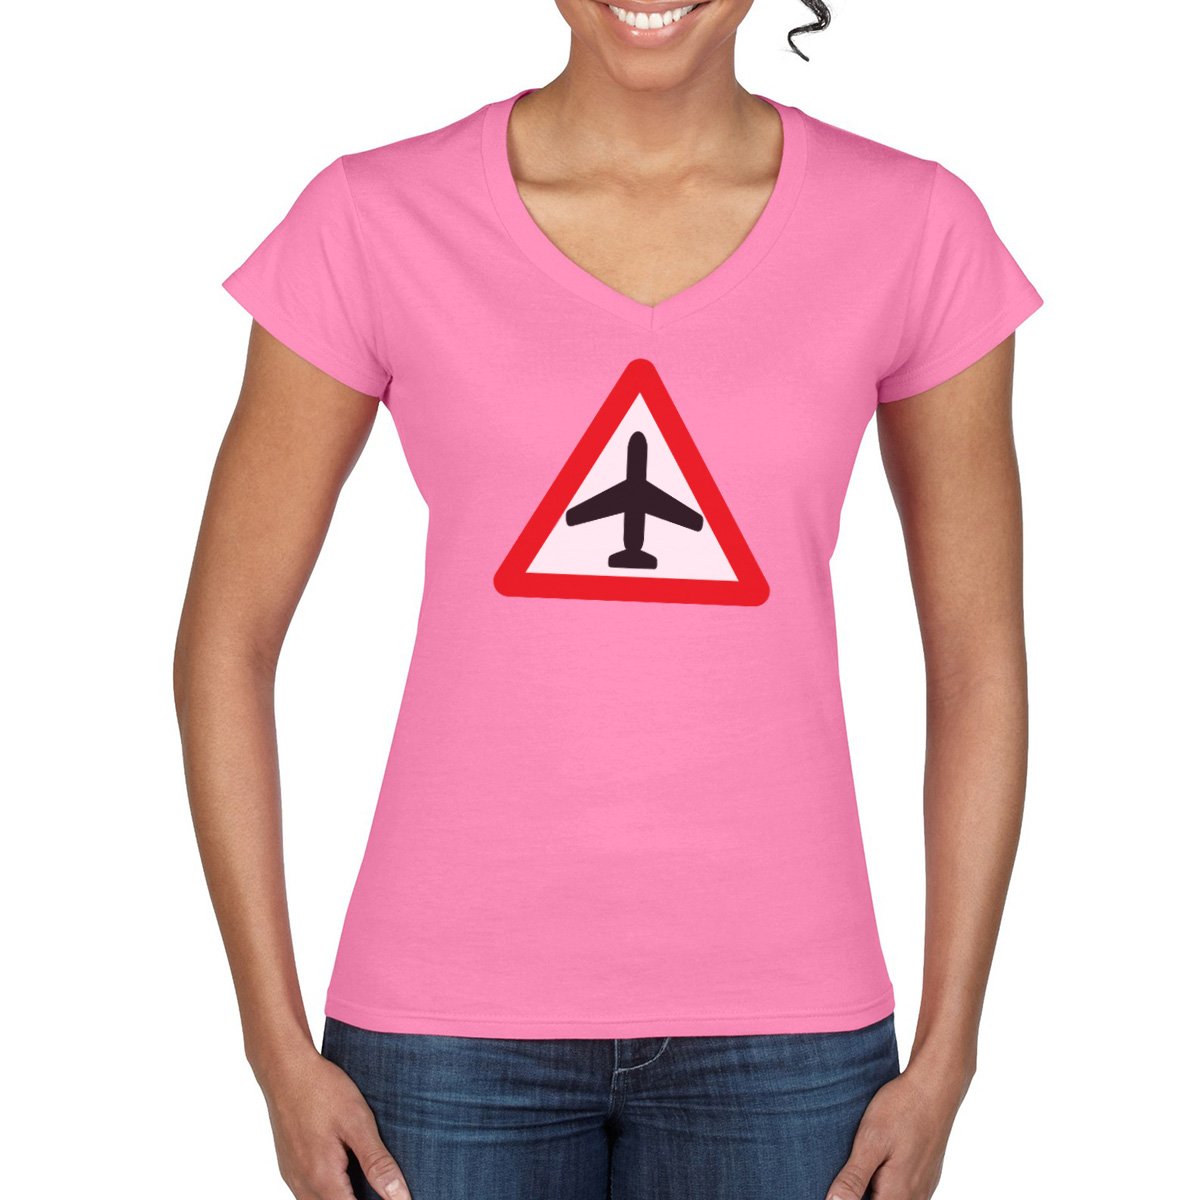 CAUTION AIRCRAFT Semi-Fitted Women's V-Neck T-Shirt